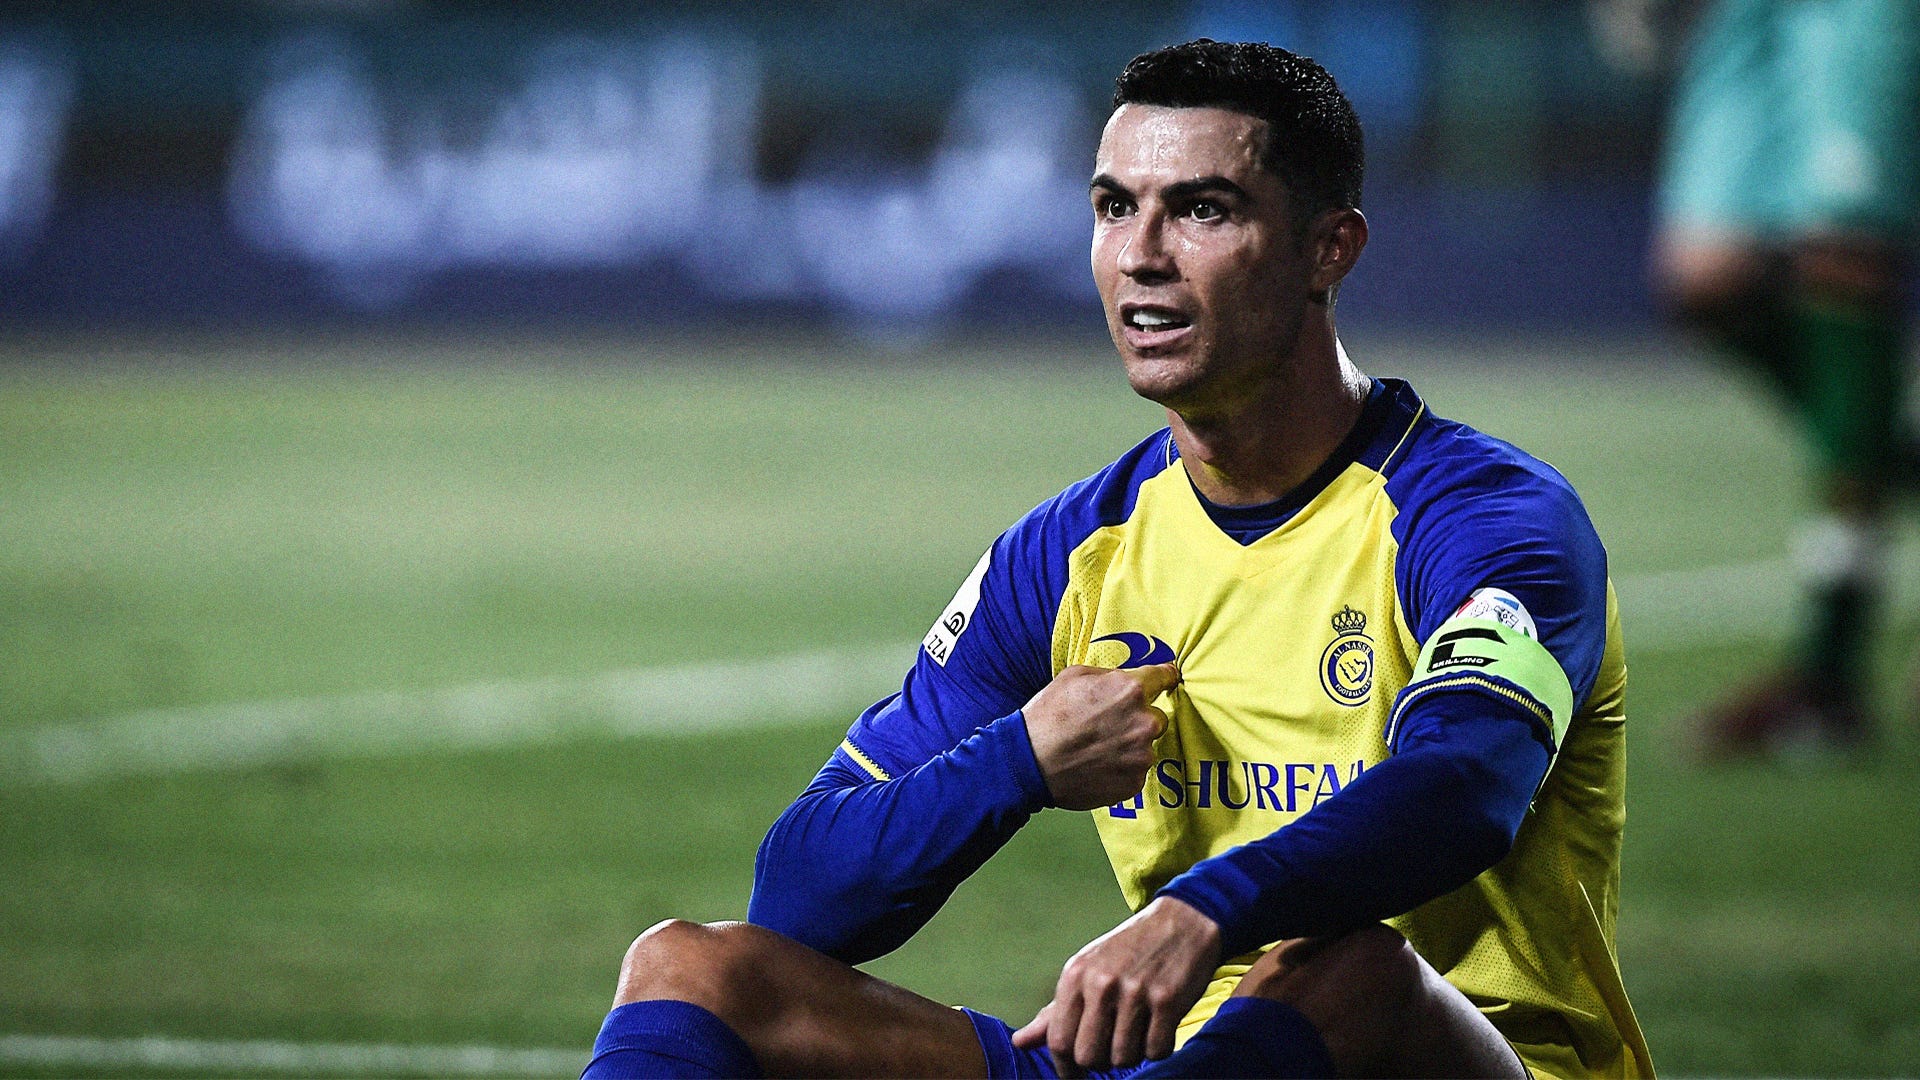 Al-Nassr vs Al-Shabab Where to watch the match online, live stream, TV channels, and kick-off time Goal US